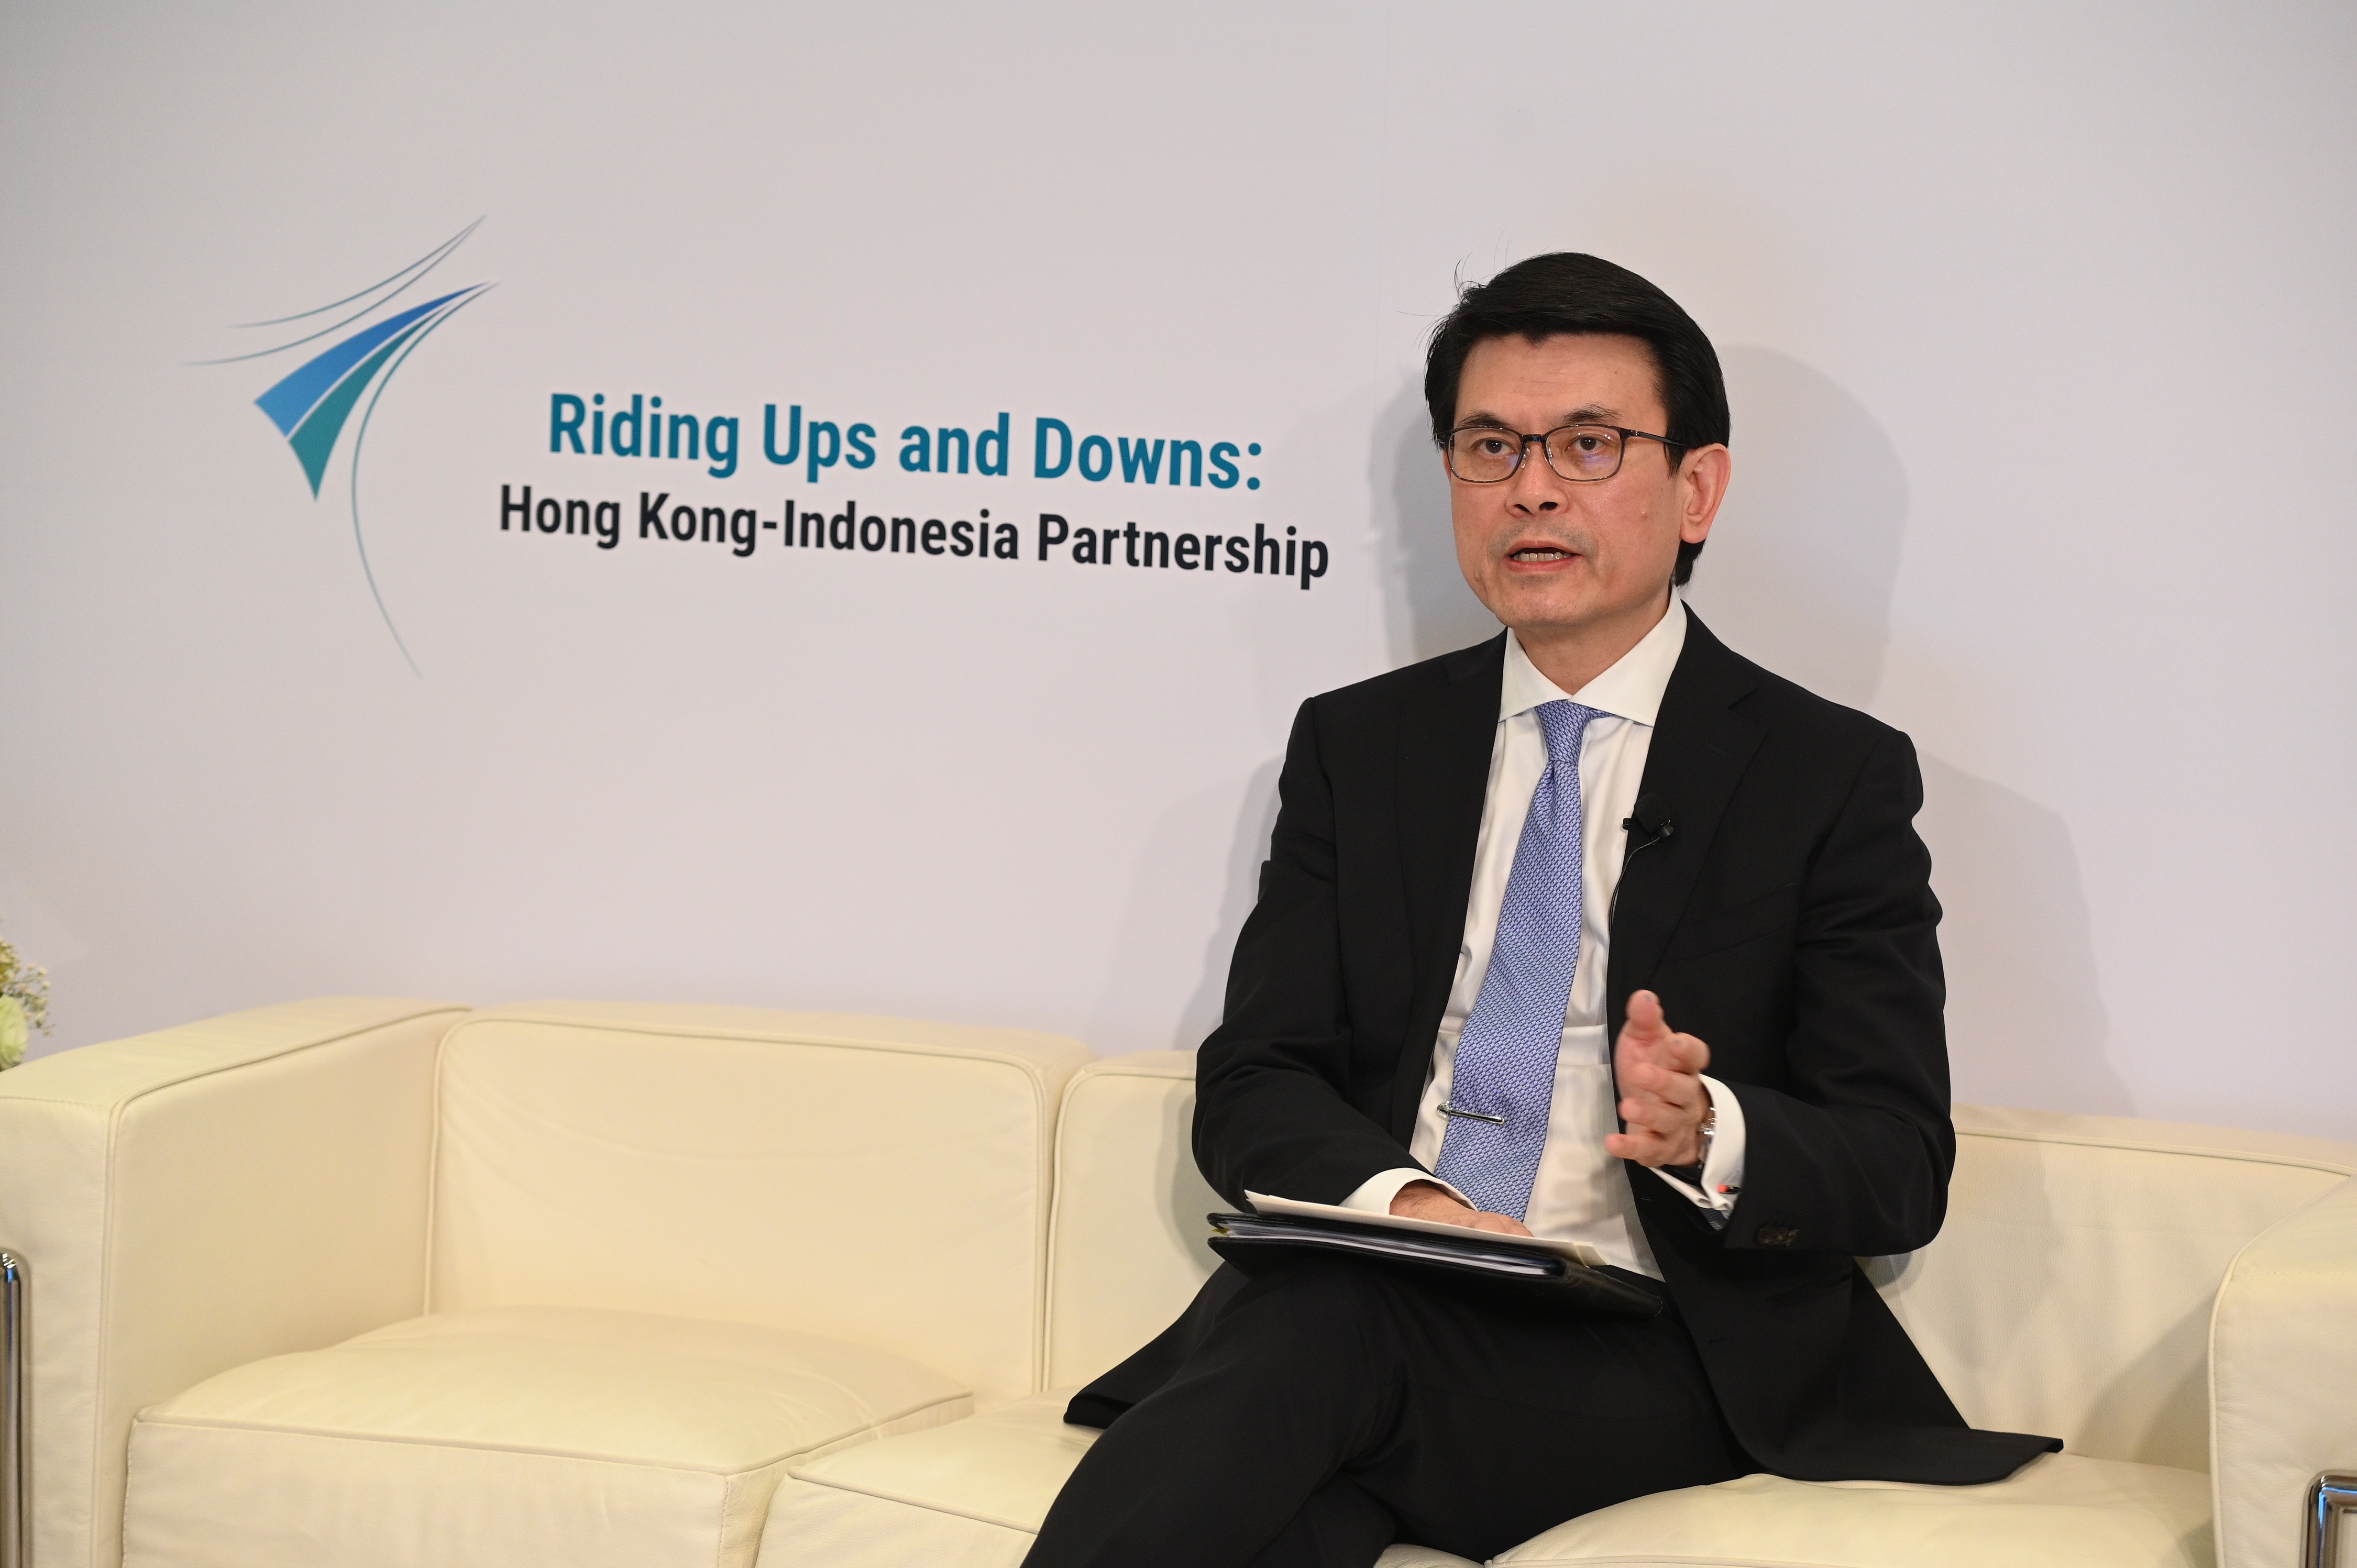 The Commerce and Economic Development Bureau and the Consulate General of the Republic of Indonesia in Hong Kong jointly held a webinar entitled Riding Ups and Downs: Hong Kong-Indonesia Partnership to strengthen partnerships in trade, investment, professional services and technology. Photo shows the Secretary for Commerce and Economic Development, Mr Edward Yau, delivering remarks at the webinar.